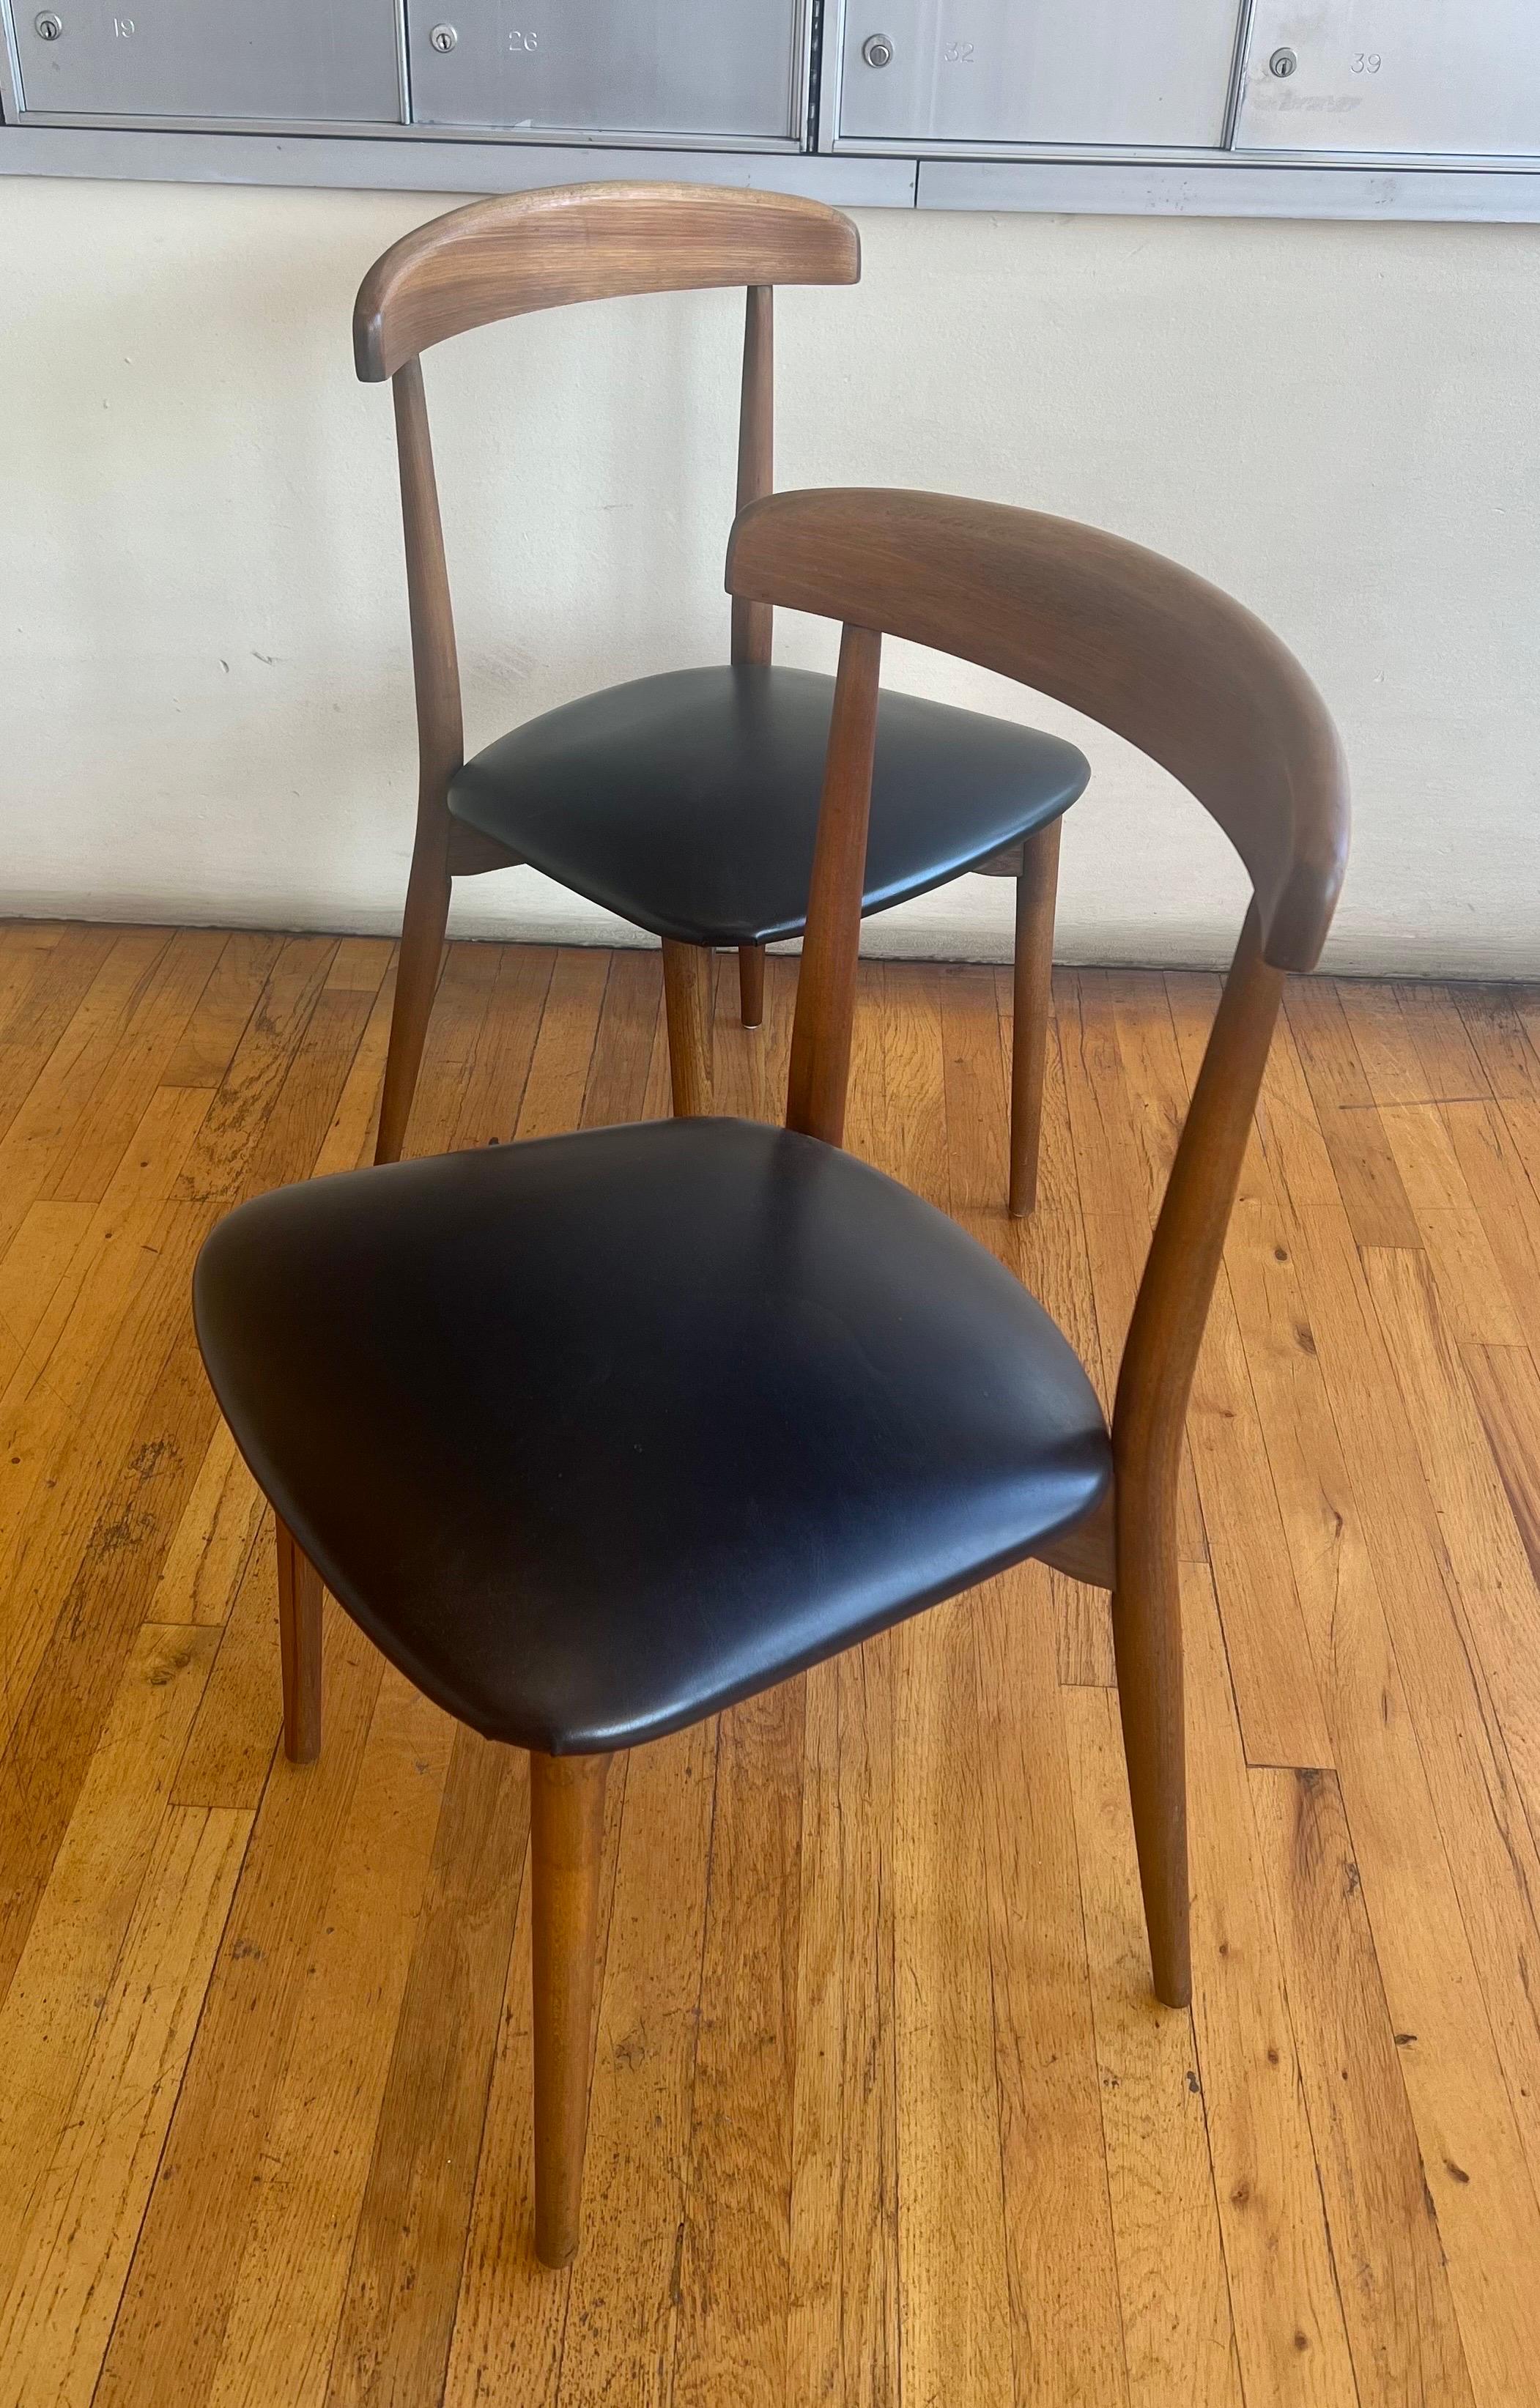 American Mid century Modern Walnut Desk/Dining Chairs 3 Available In Excellent Condition For Sale In San Diego, CA